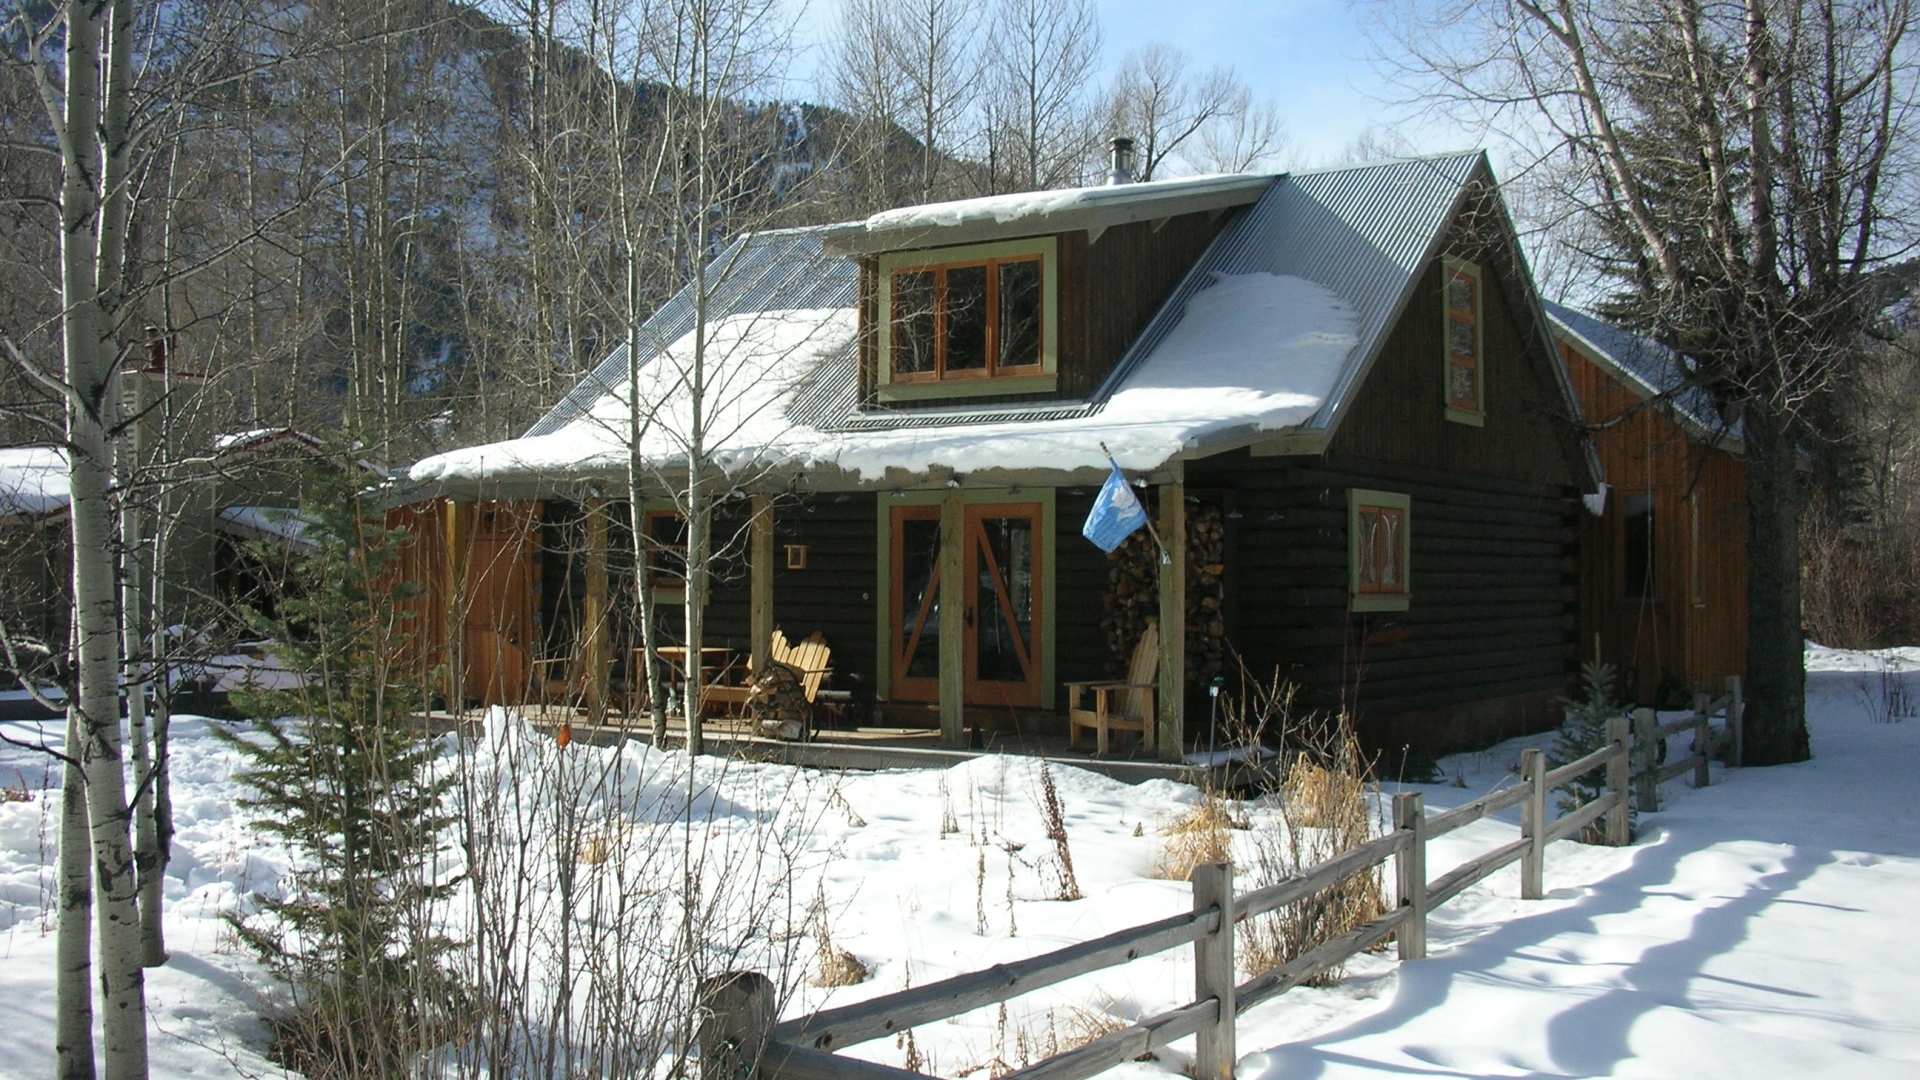 Exterior view of the Redstone Cabin covered in snow in Redstone Colorado.